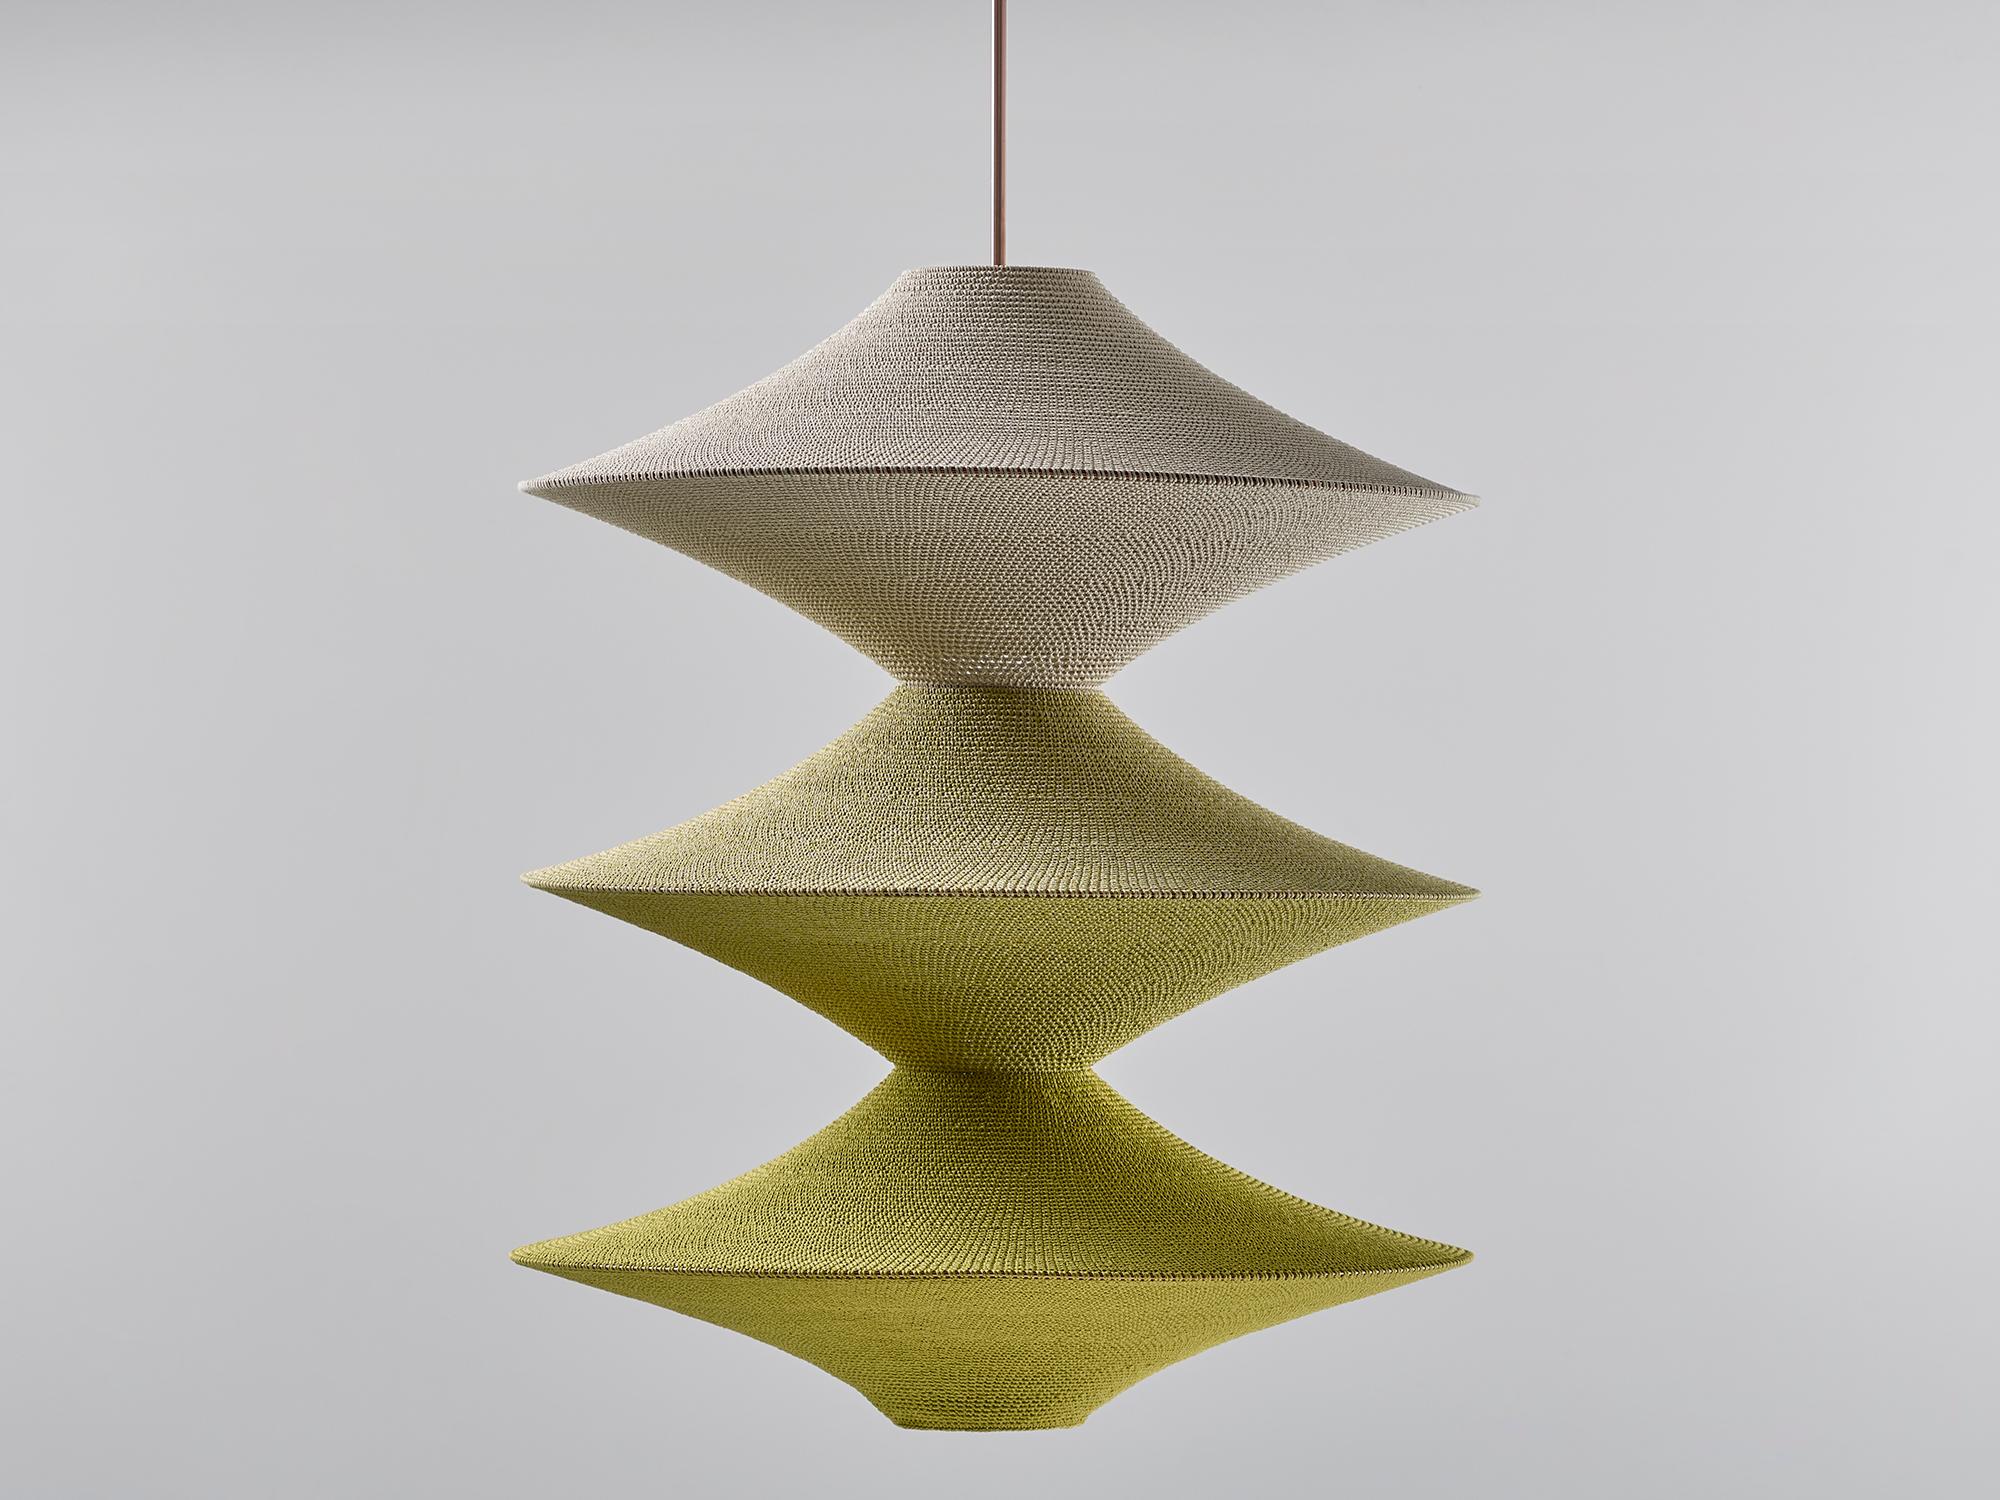 Large solitaire 03 pendant lamp by Naomi Paul
Dimensions: D 80 x H 110 cm
Materials: Metal frame, Egyptian cotton cord.
Color: Ombré in Ecru and Greengold.
Available in other colors and in 4 sizes: D50, D60, D80, D100 cm.
Available in plain,